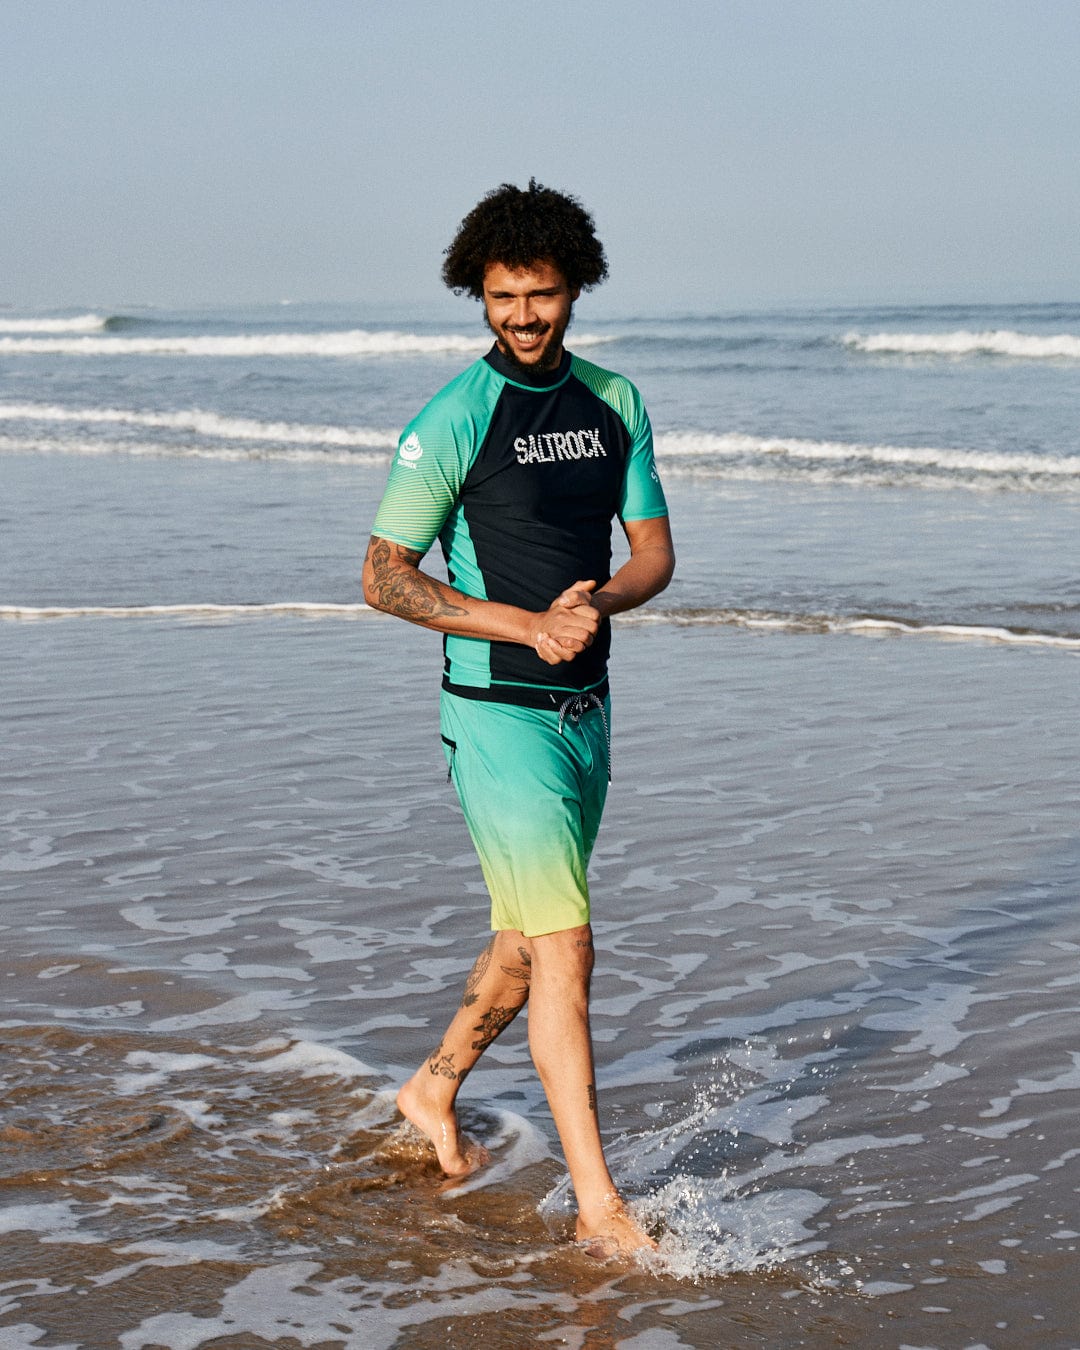 Man with curly hair in a Saltrock DNA Wave - Recycled Mens Short Sleeve Rashvest - Black/Green wetsuit, walking on a beach, smiling, with waves touching his feet.